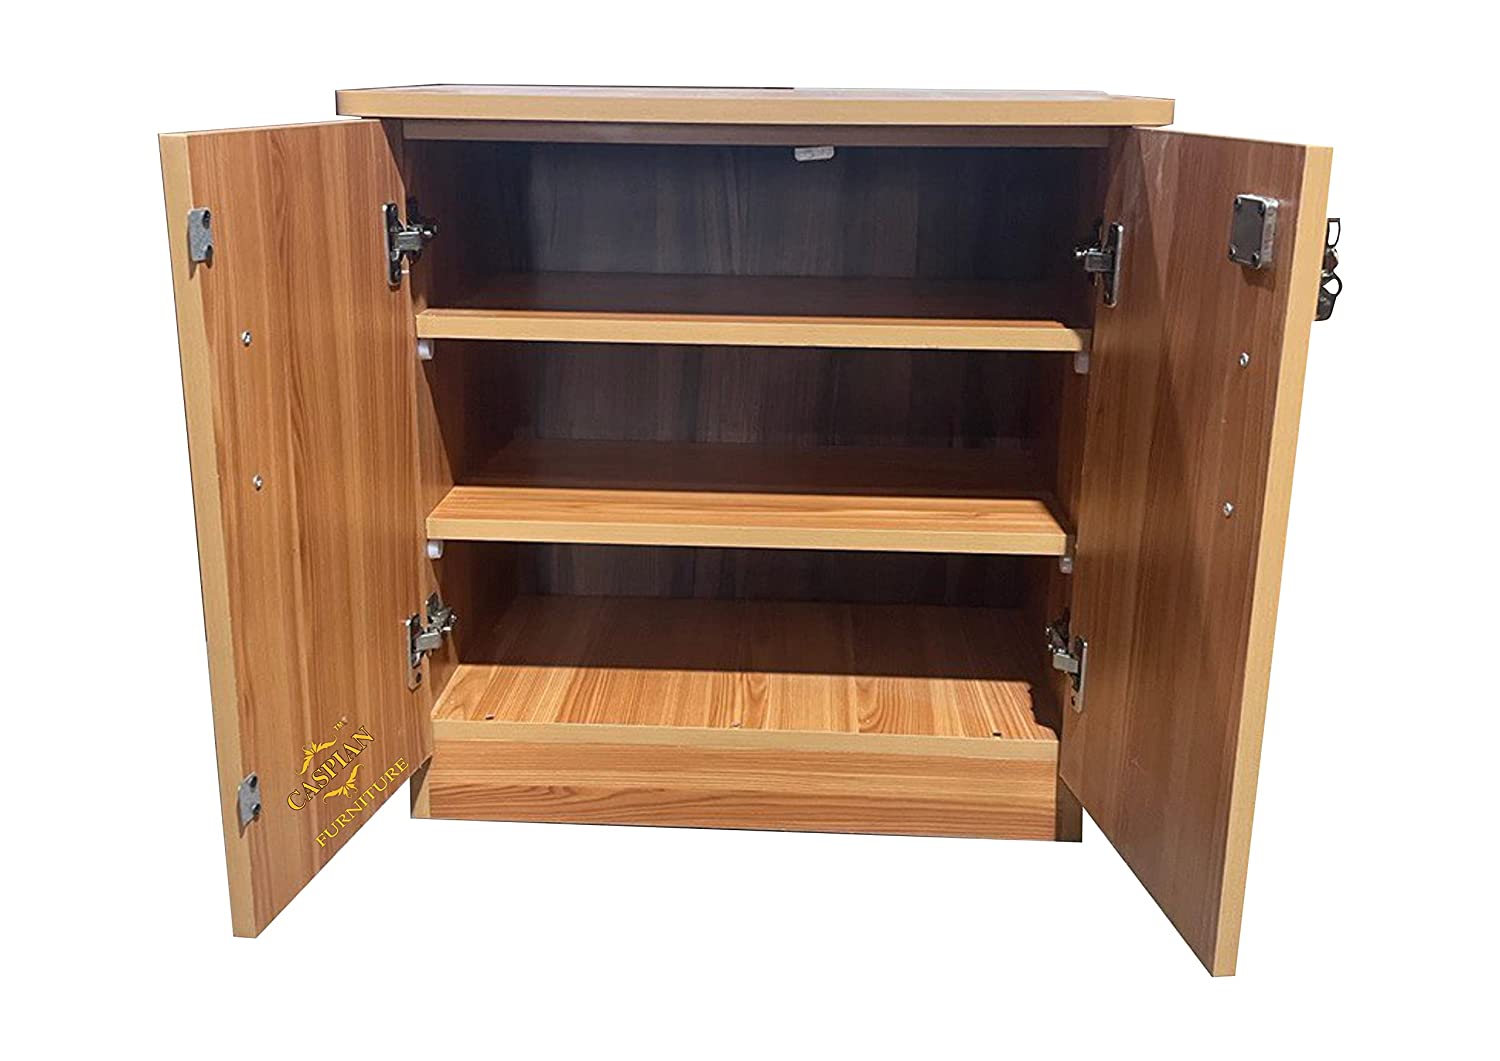 Engineered Wood 3 Tier Shelf in Mogany Finish| Shoe Cabinet | Hall Way Furniture | Outdoor Cabinet with Lock | Size 24 x 24 inches